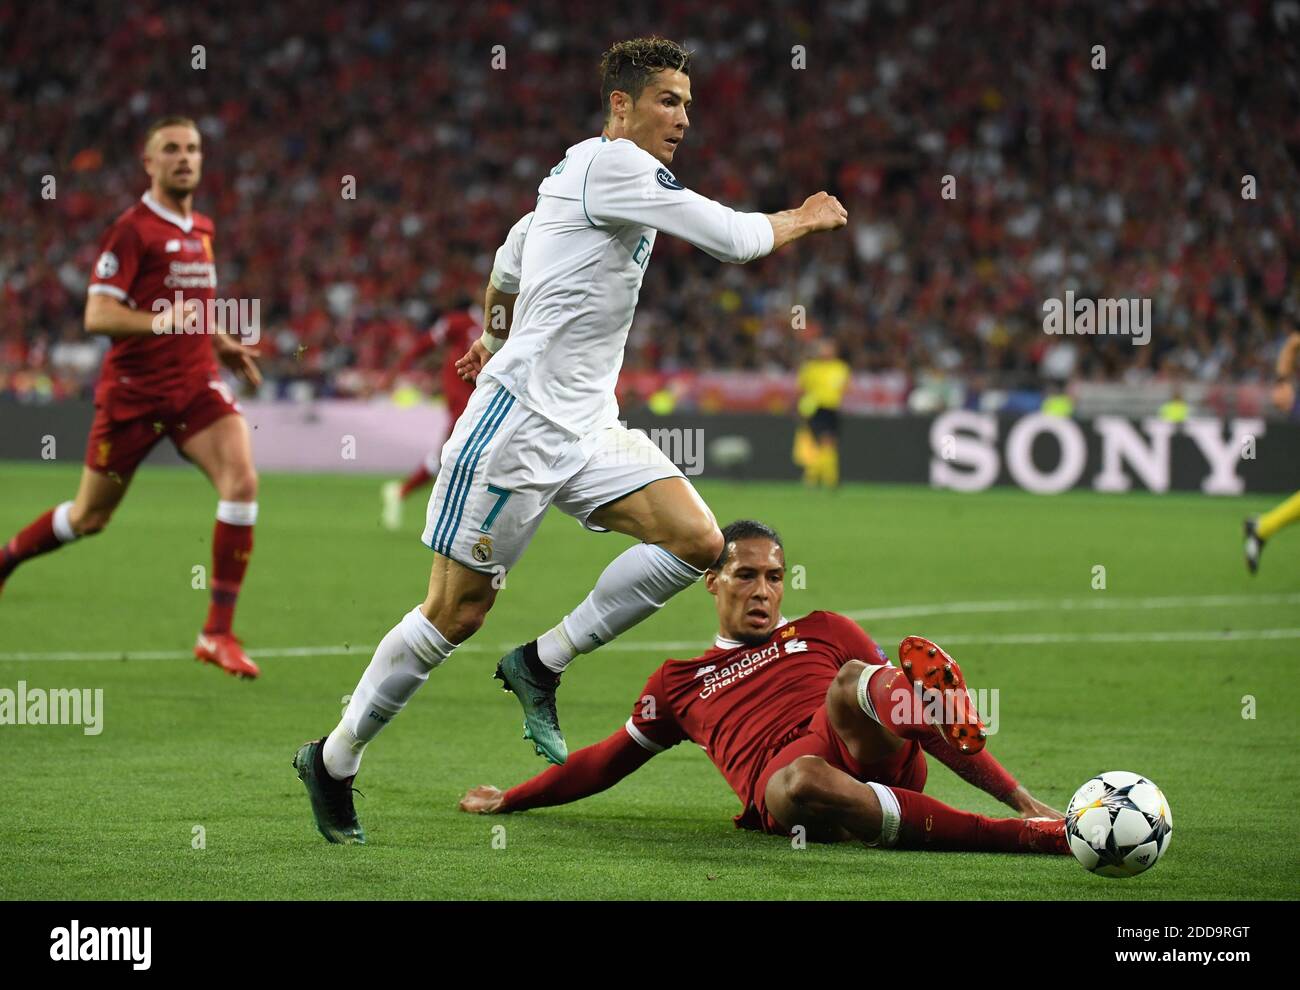 26 May 2018, Ukraine, Kiev: Champions League, Real Madrid vs FC Liverpool, finals at the Olimpiyskiy National Sports Complex. Madrid's Cristiano Ronaldo (L) and Liverpool's Virgil Van Dijk vie for the ball. Photo by Ina Fassbender/DPA/ABACAPRESS.COM Stock Photo